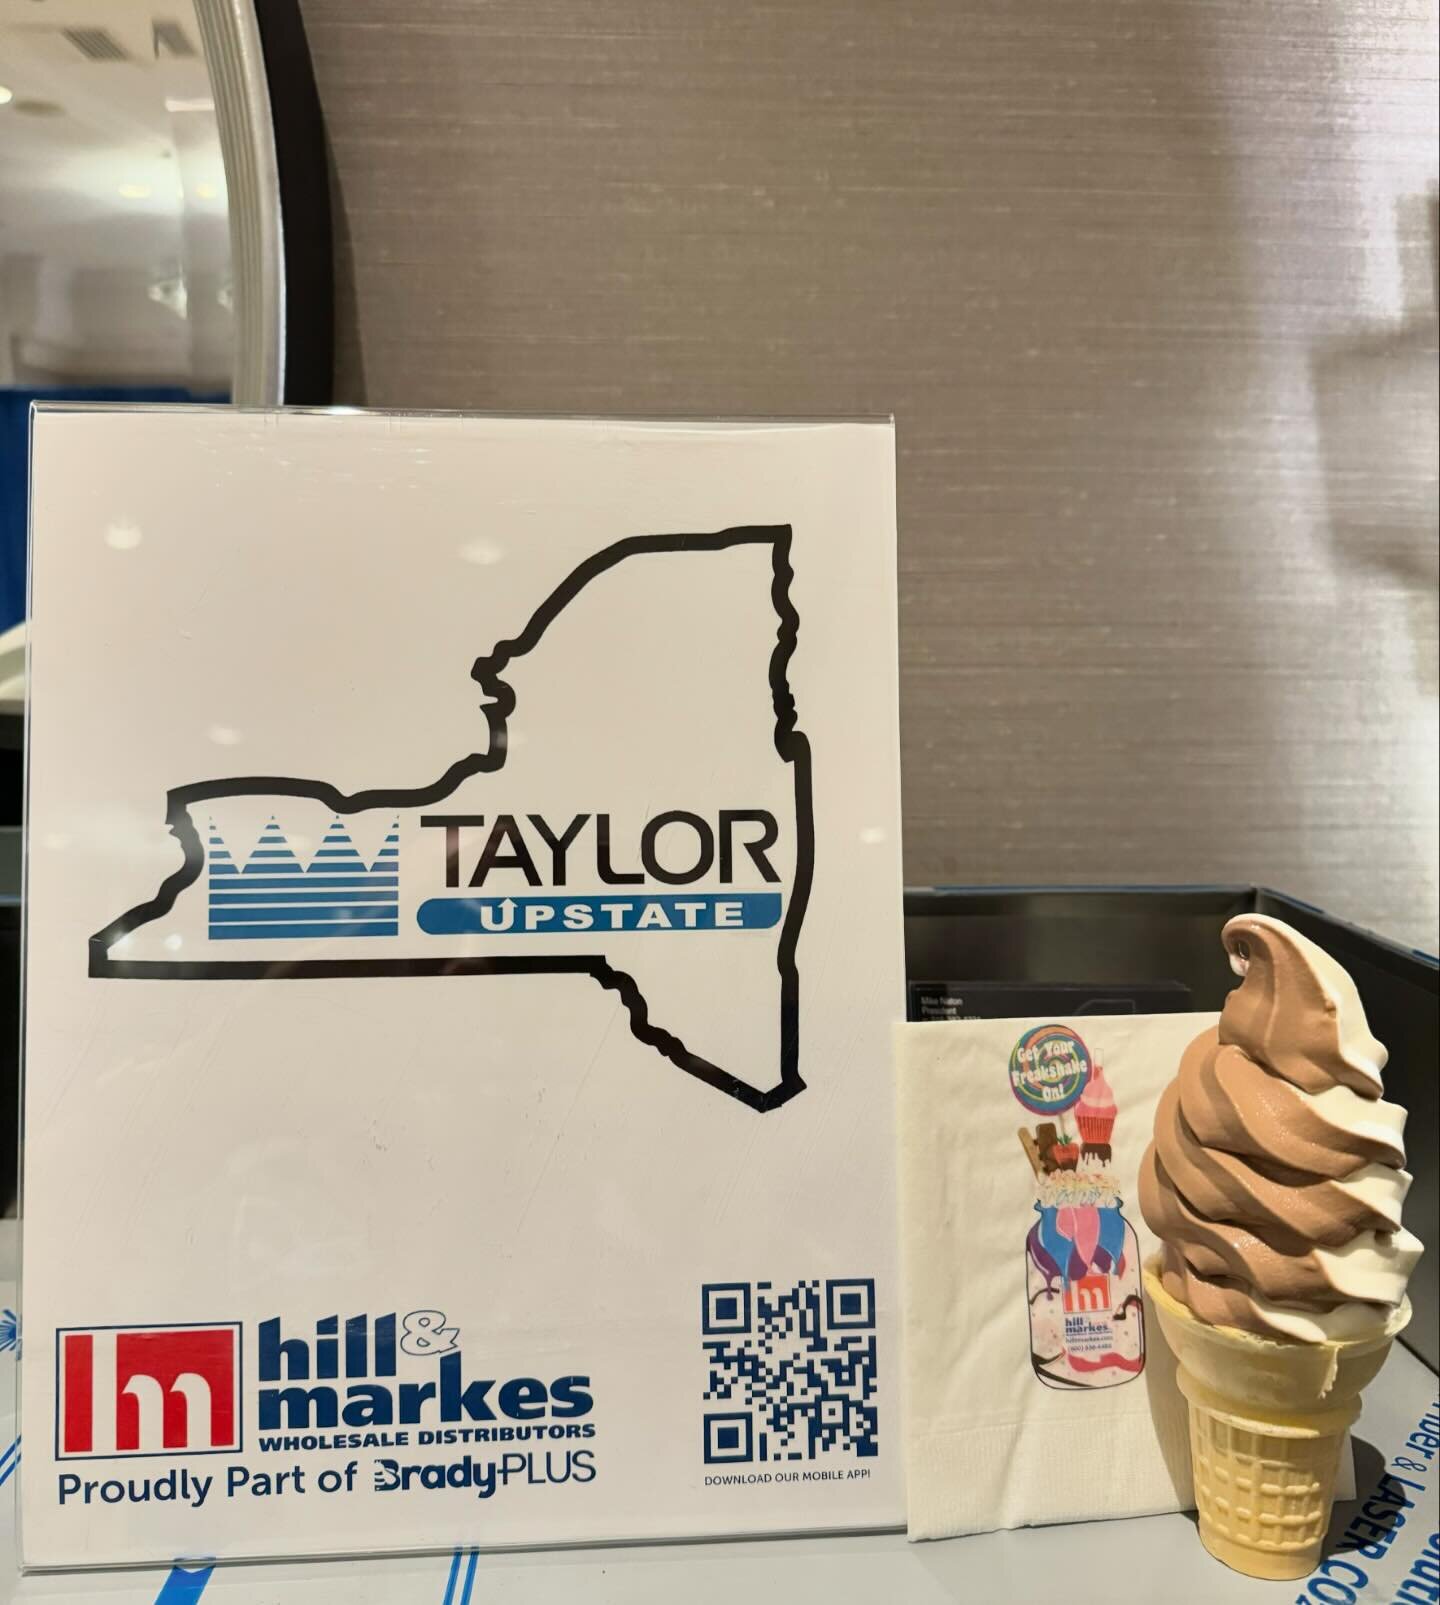 Have an ice cream shop in NYS? Come to the @hillnmarkes Ice cream expo today at the Desmond! 9:30-1:30
 #icecream #softserve #frozencocktails  #flavorburst #icecreamofinsta